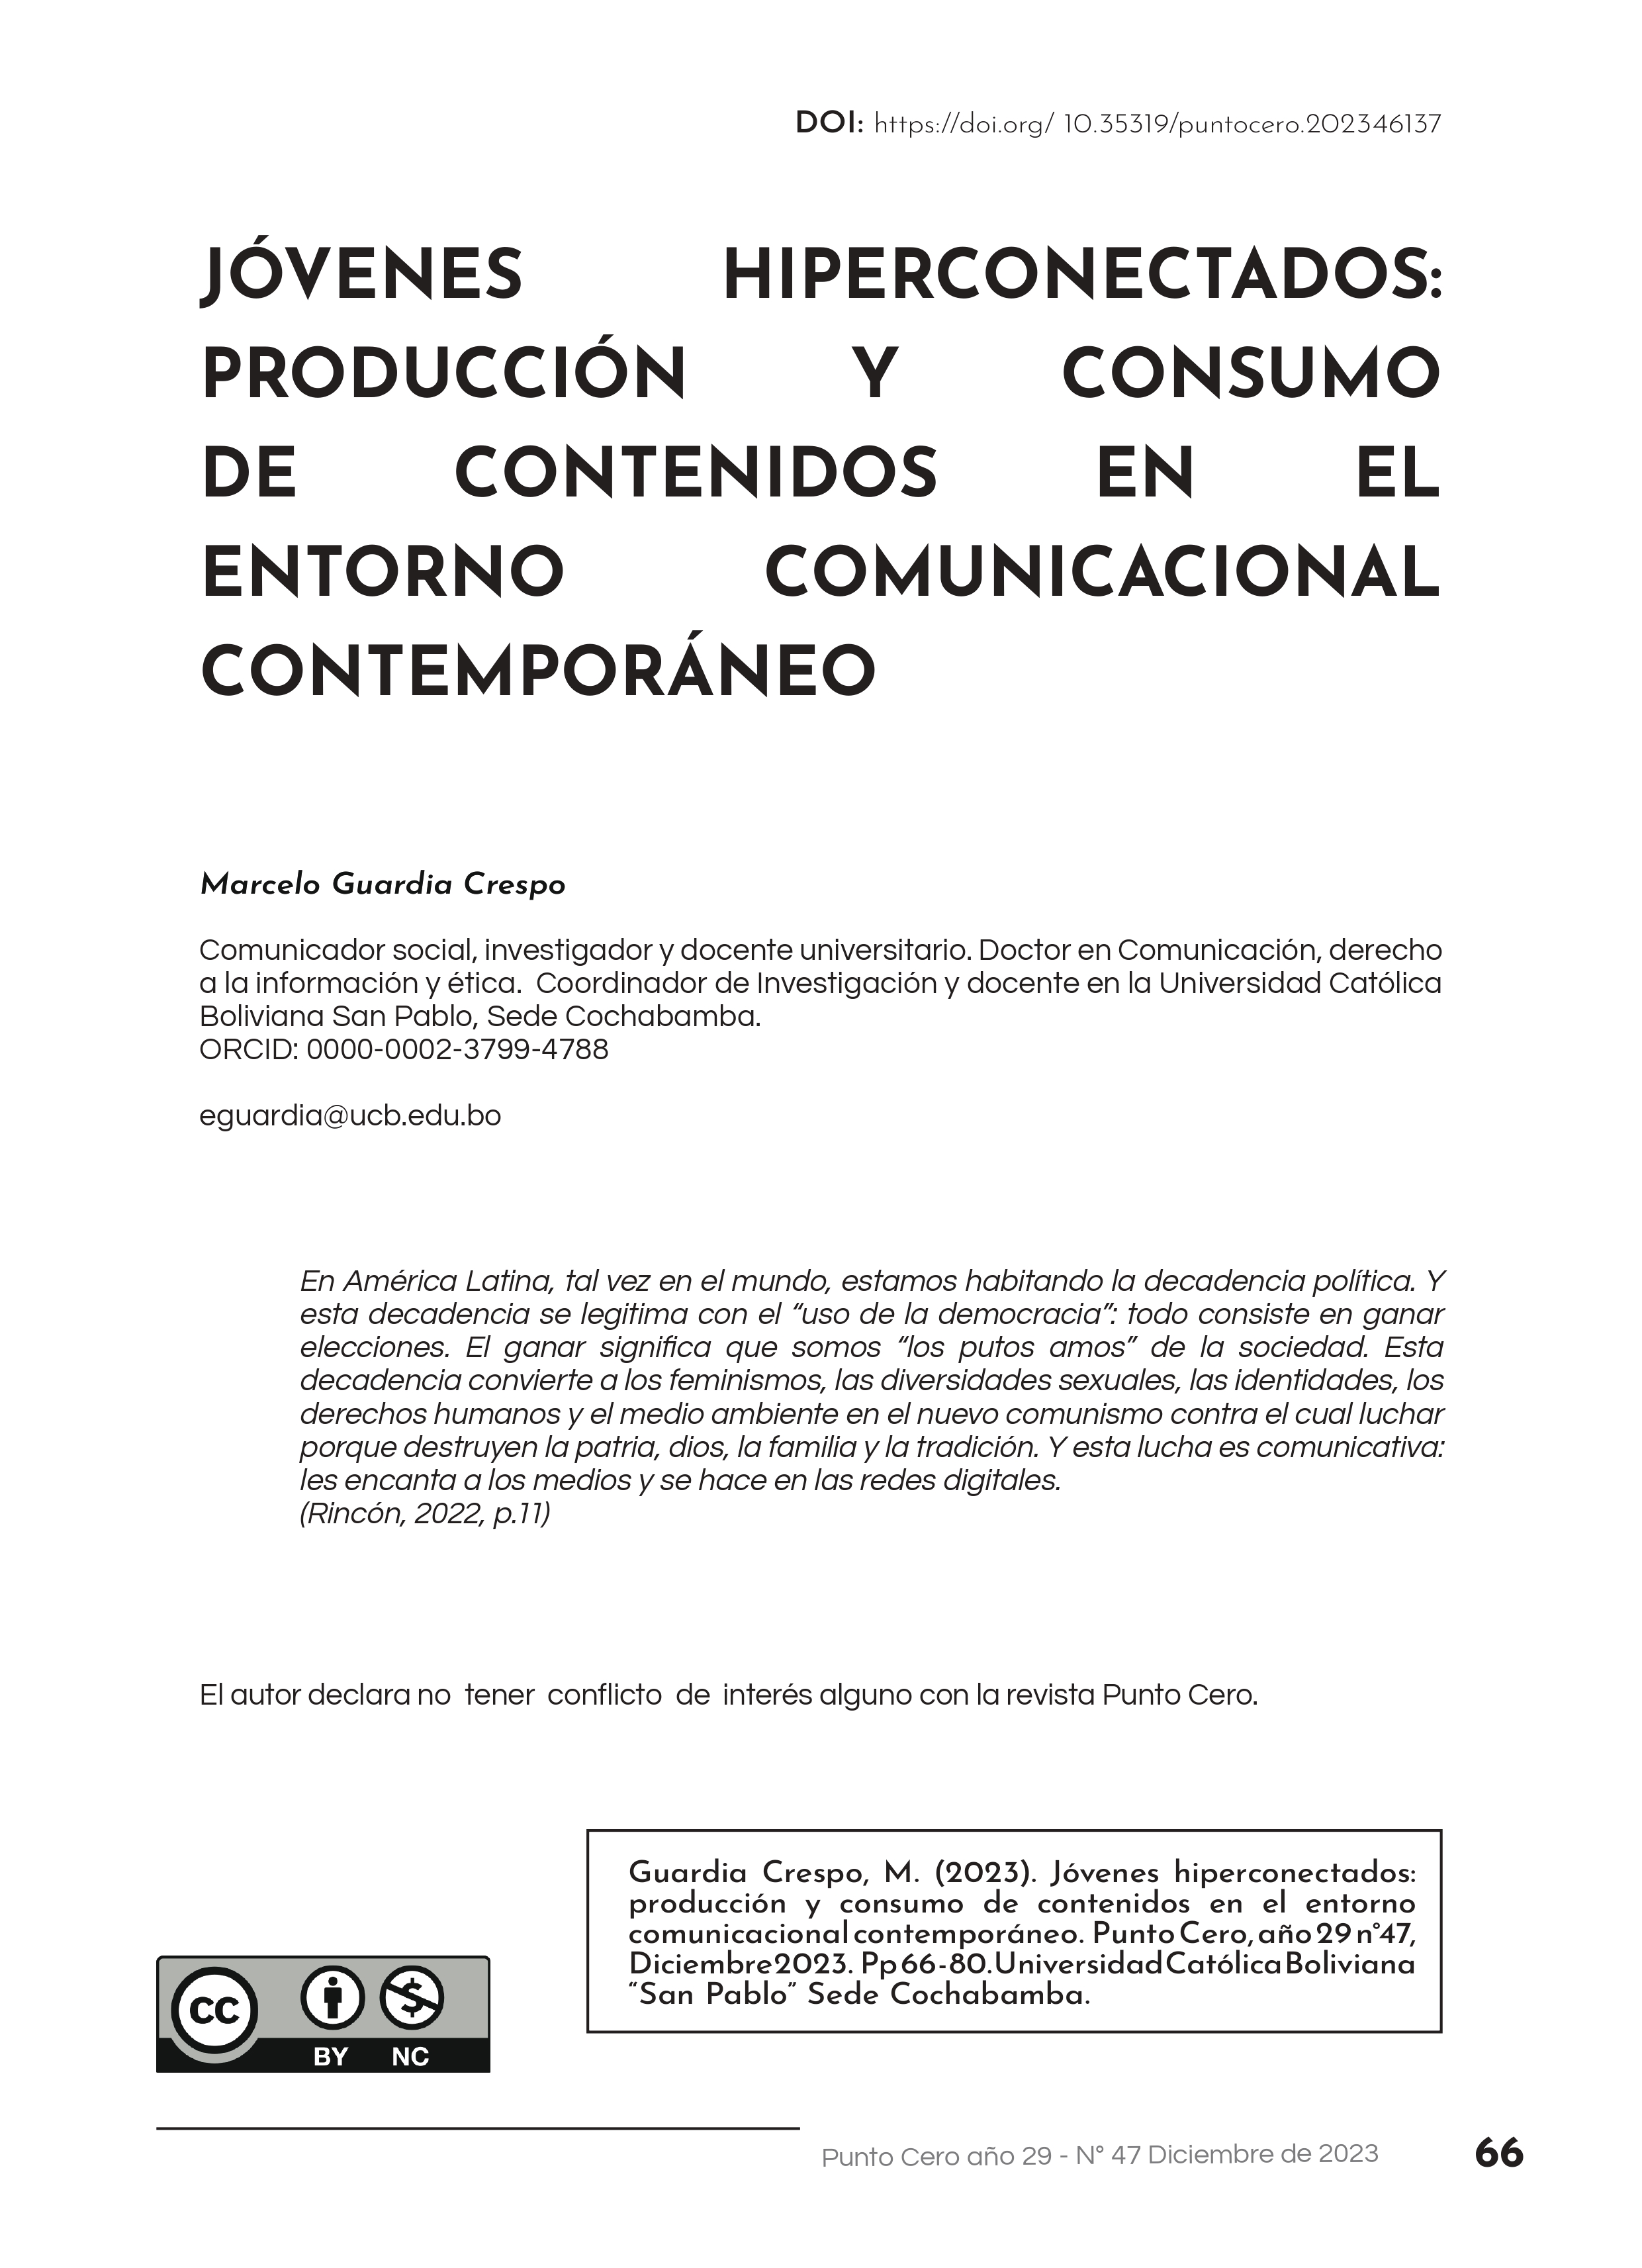 Hyperconnected youth: production and consumption of content in the contemporary communication environment